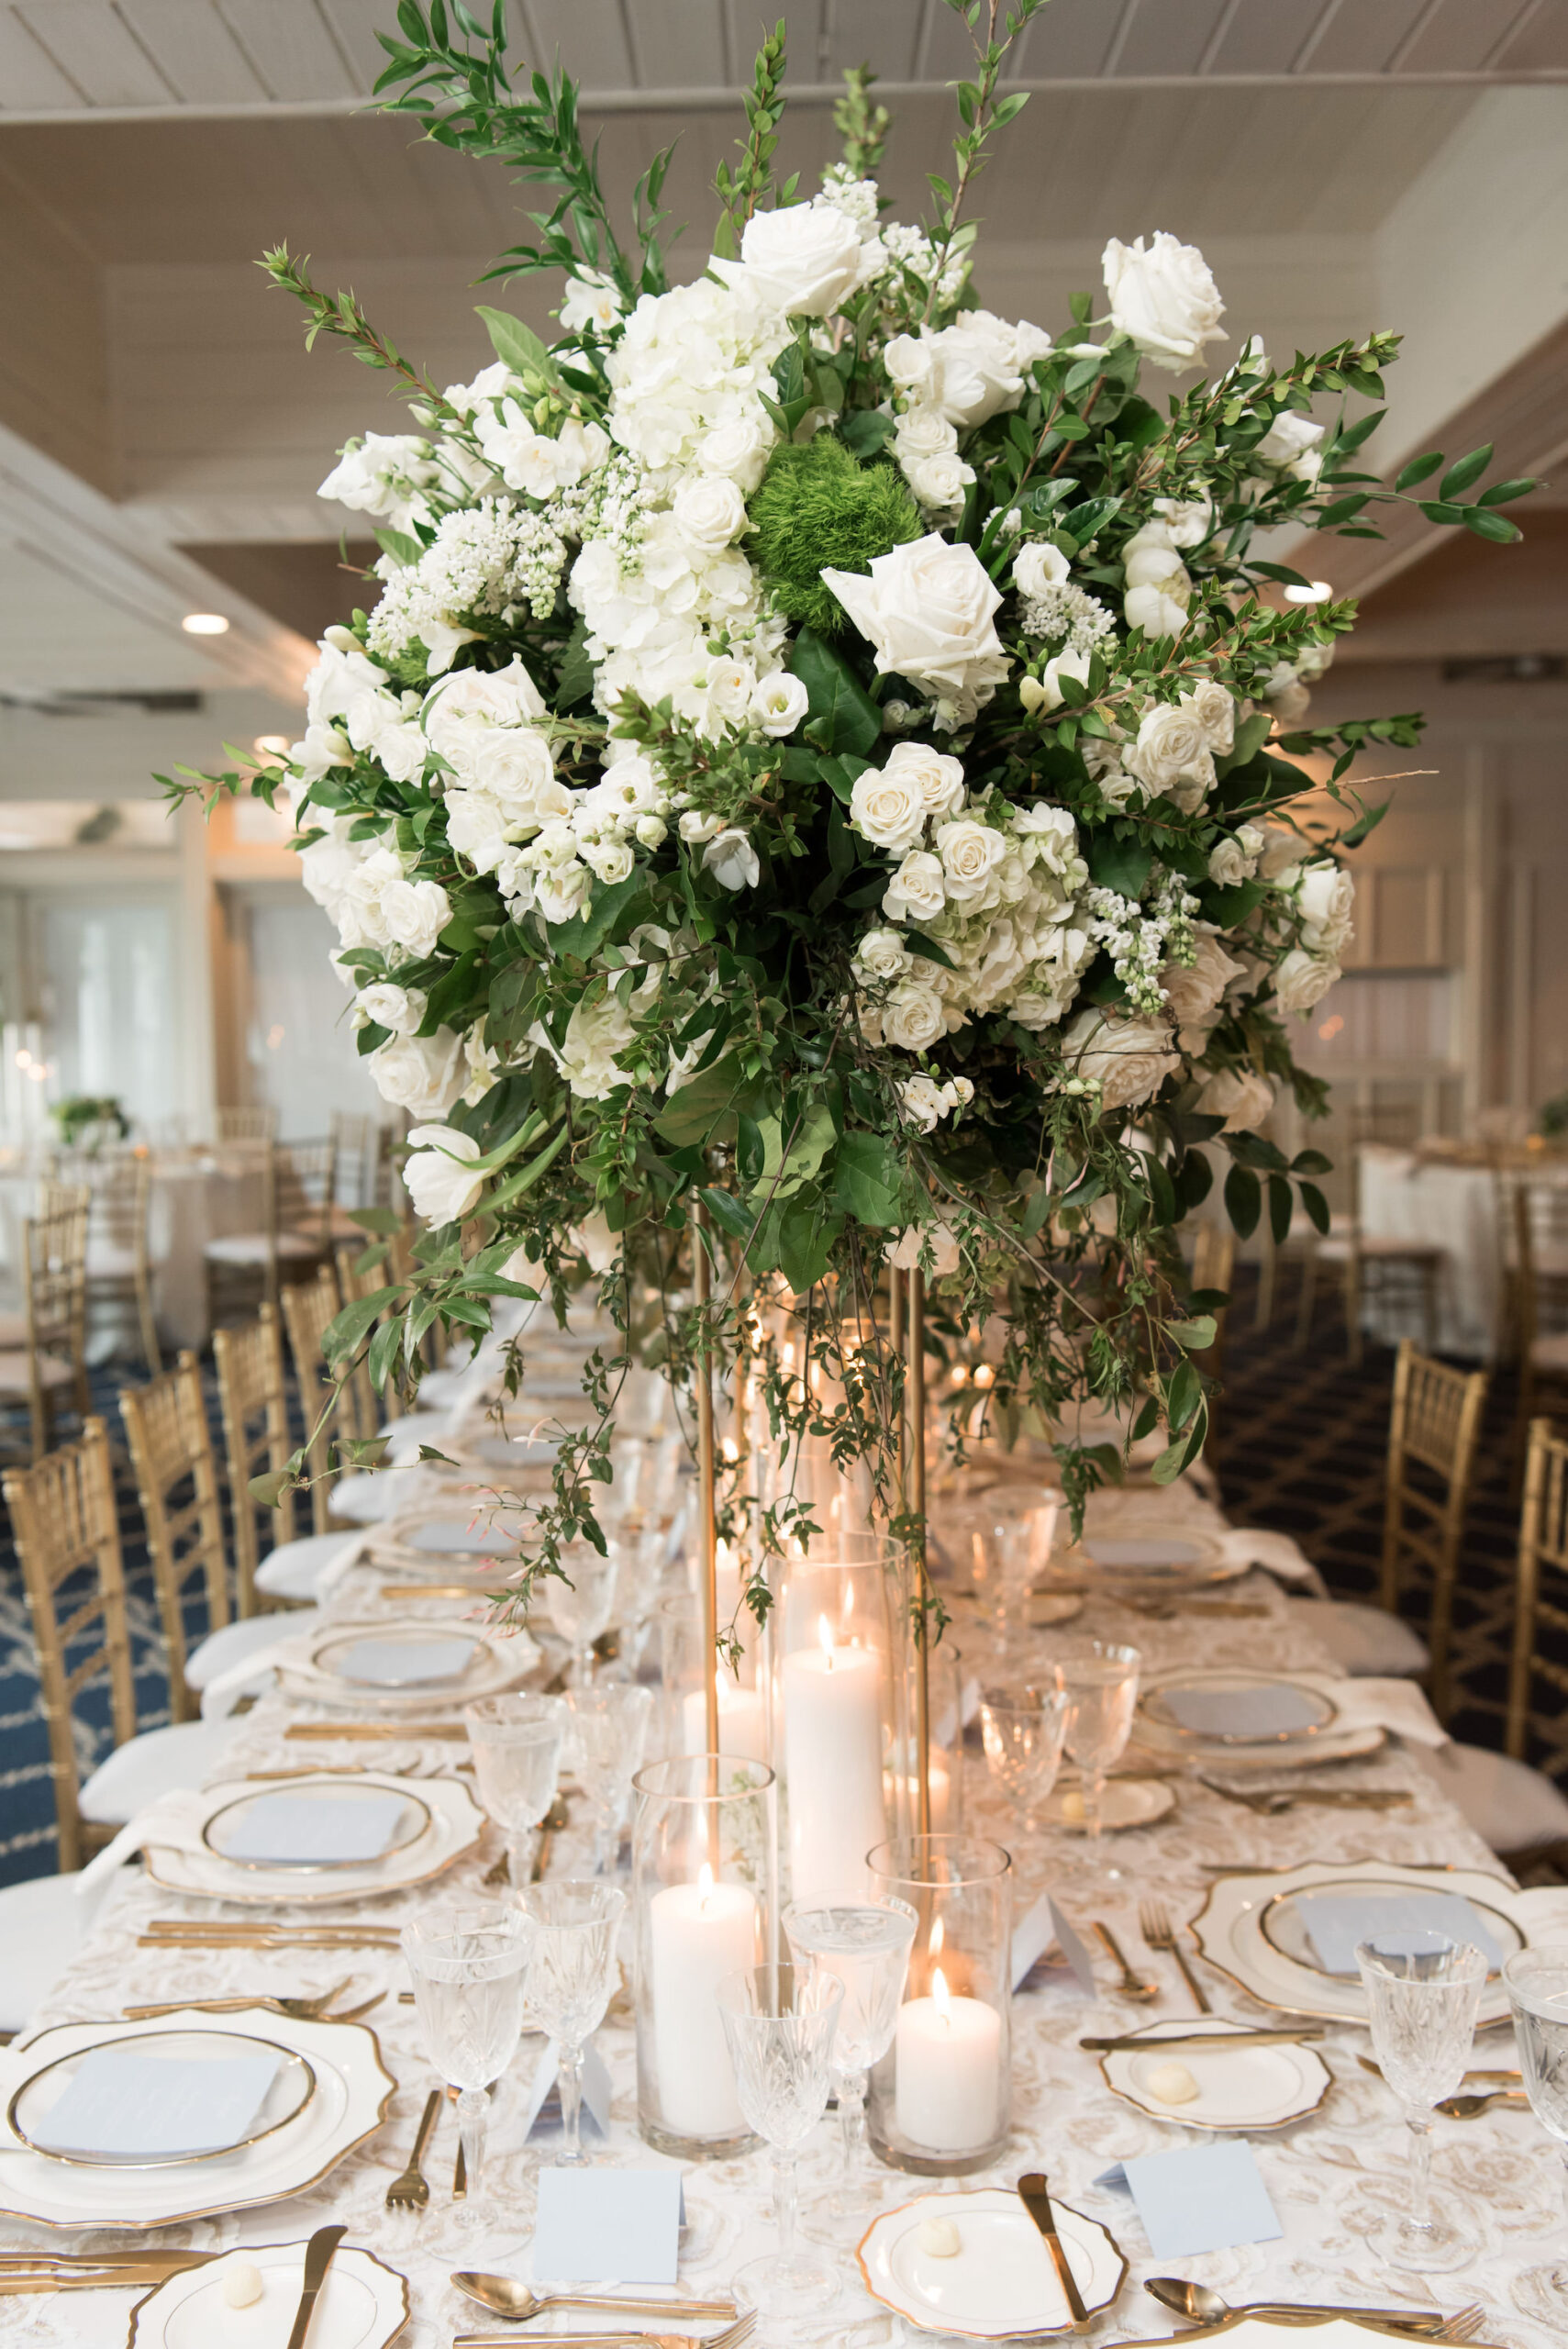 Timeless Wedding Reception Centerpiece Ideas | White Roses, Hydrangeas, and Greenery | Tampa Bay Planner Parties A La Carte